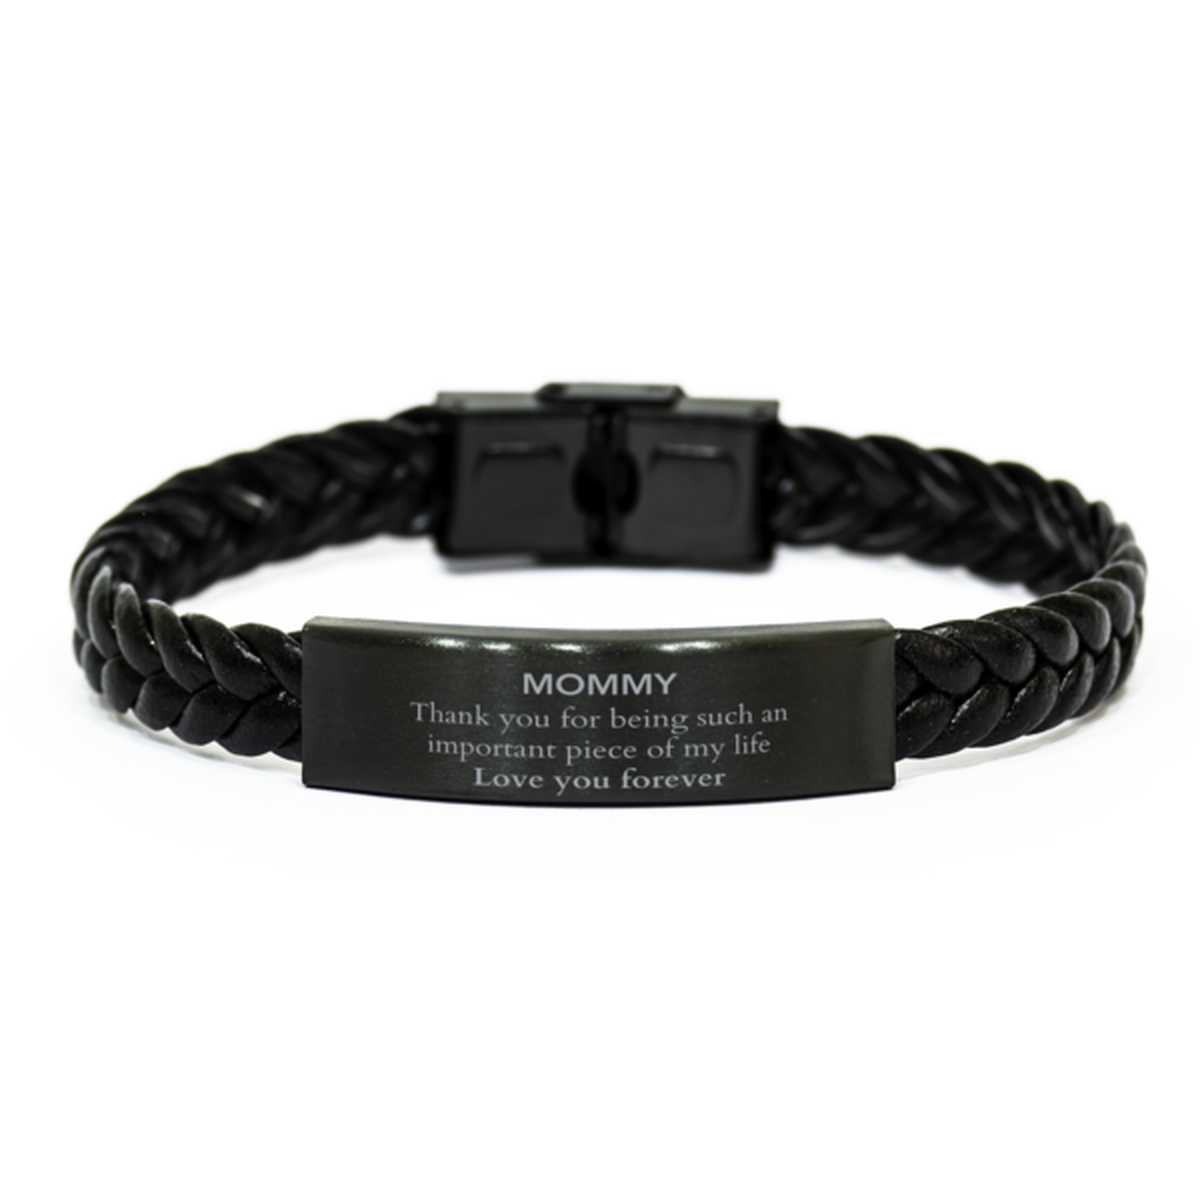 Appropriate Mommy Braided Leather Bracelet Epic Birthday Gifts for Mommy Thank you for being such an important piece of my life Mommy Christmas Mothers Fathers Day